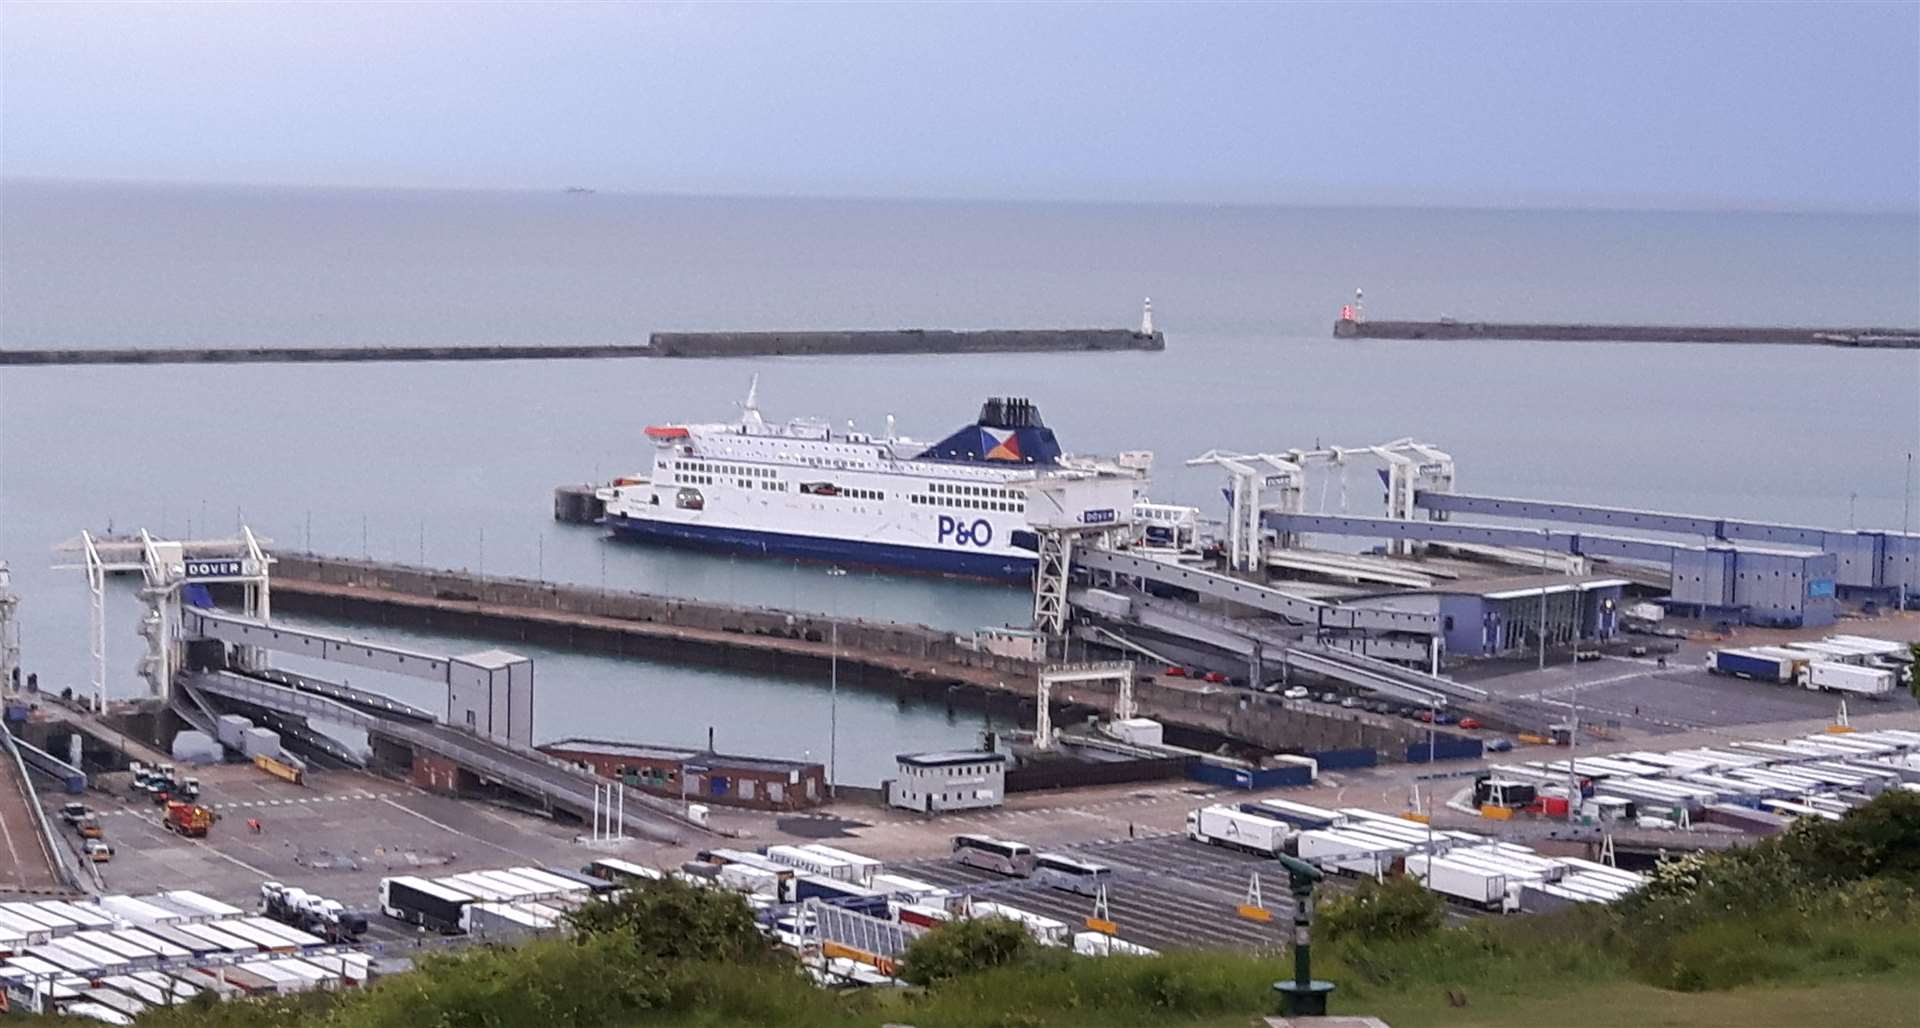 Operation Brock is likely to be brought in if there is major disruption at the Port of Dover